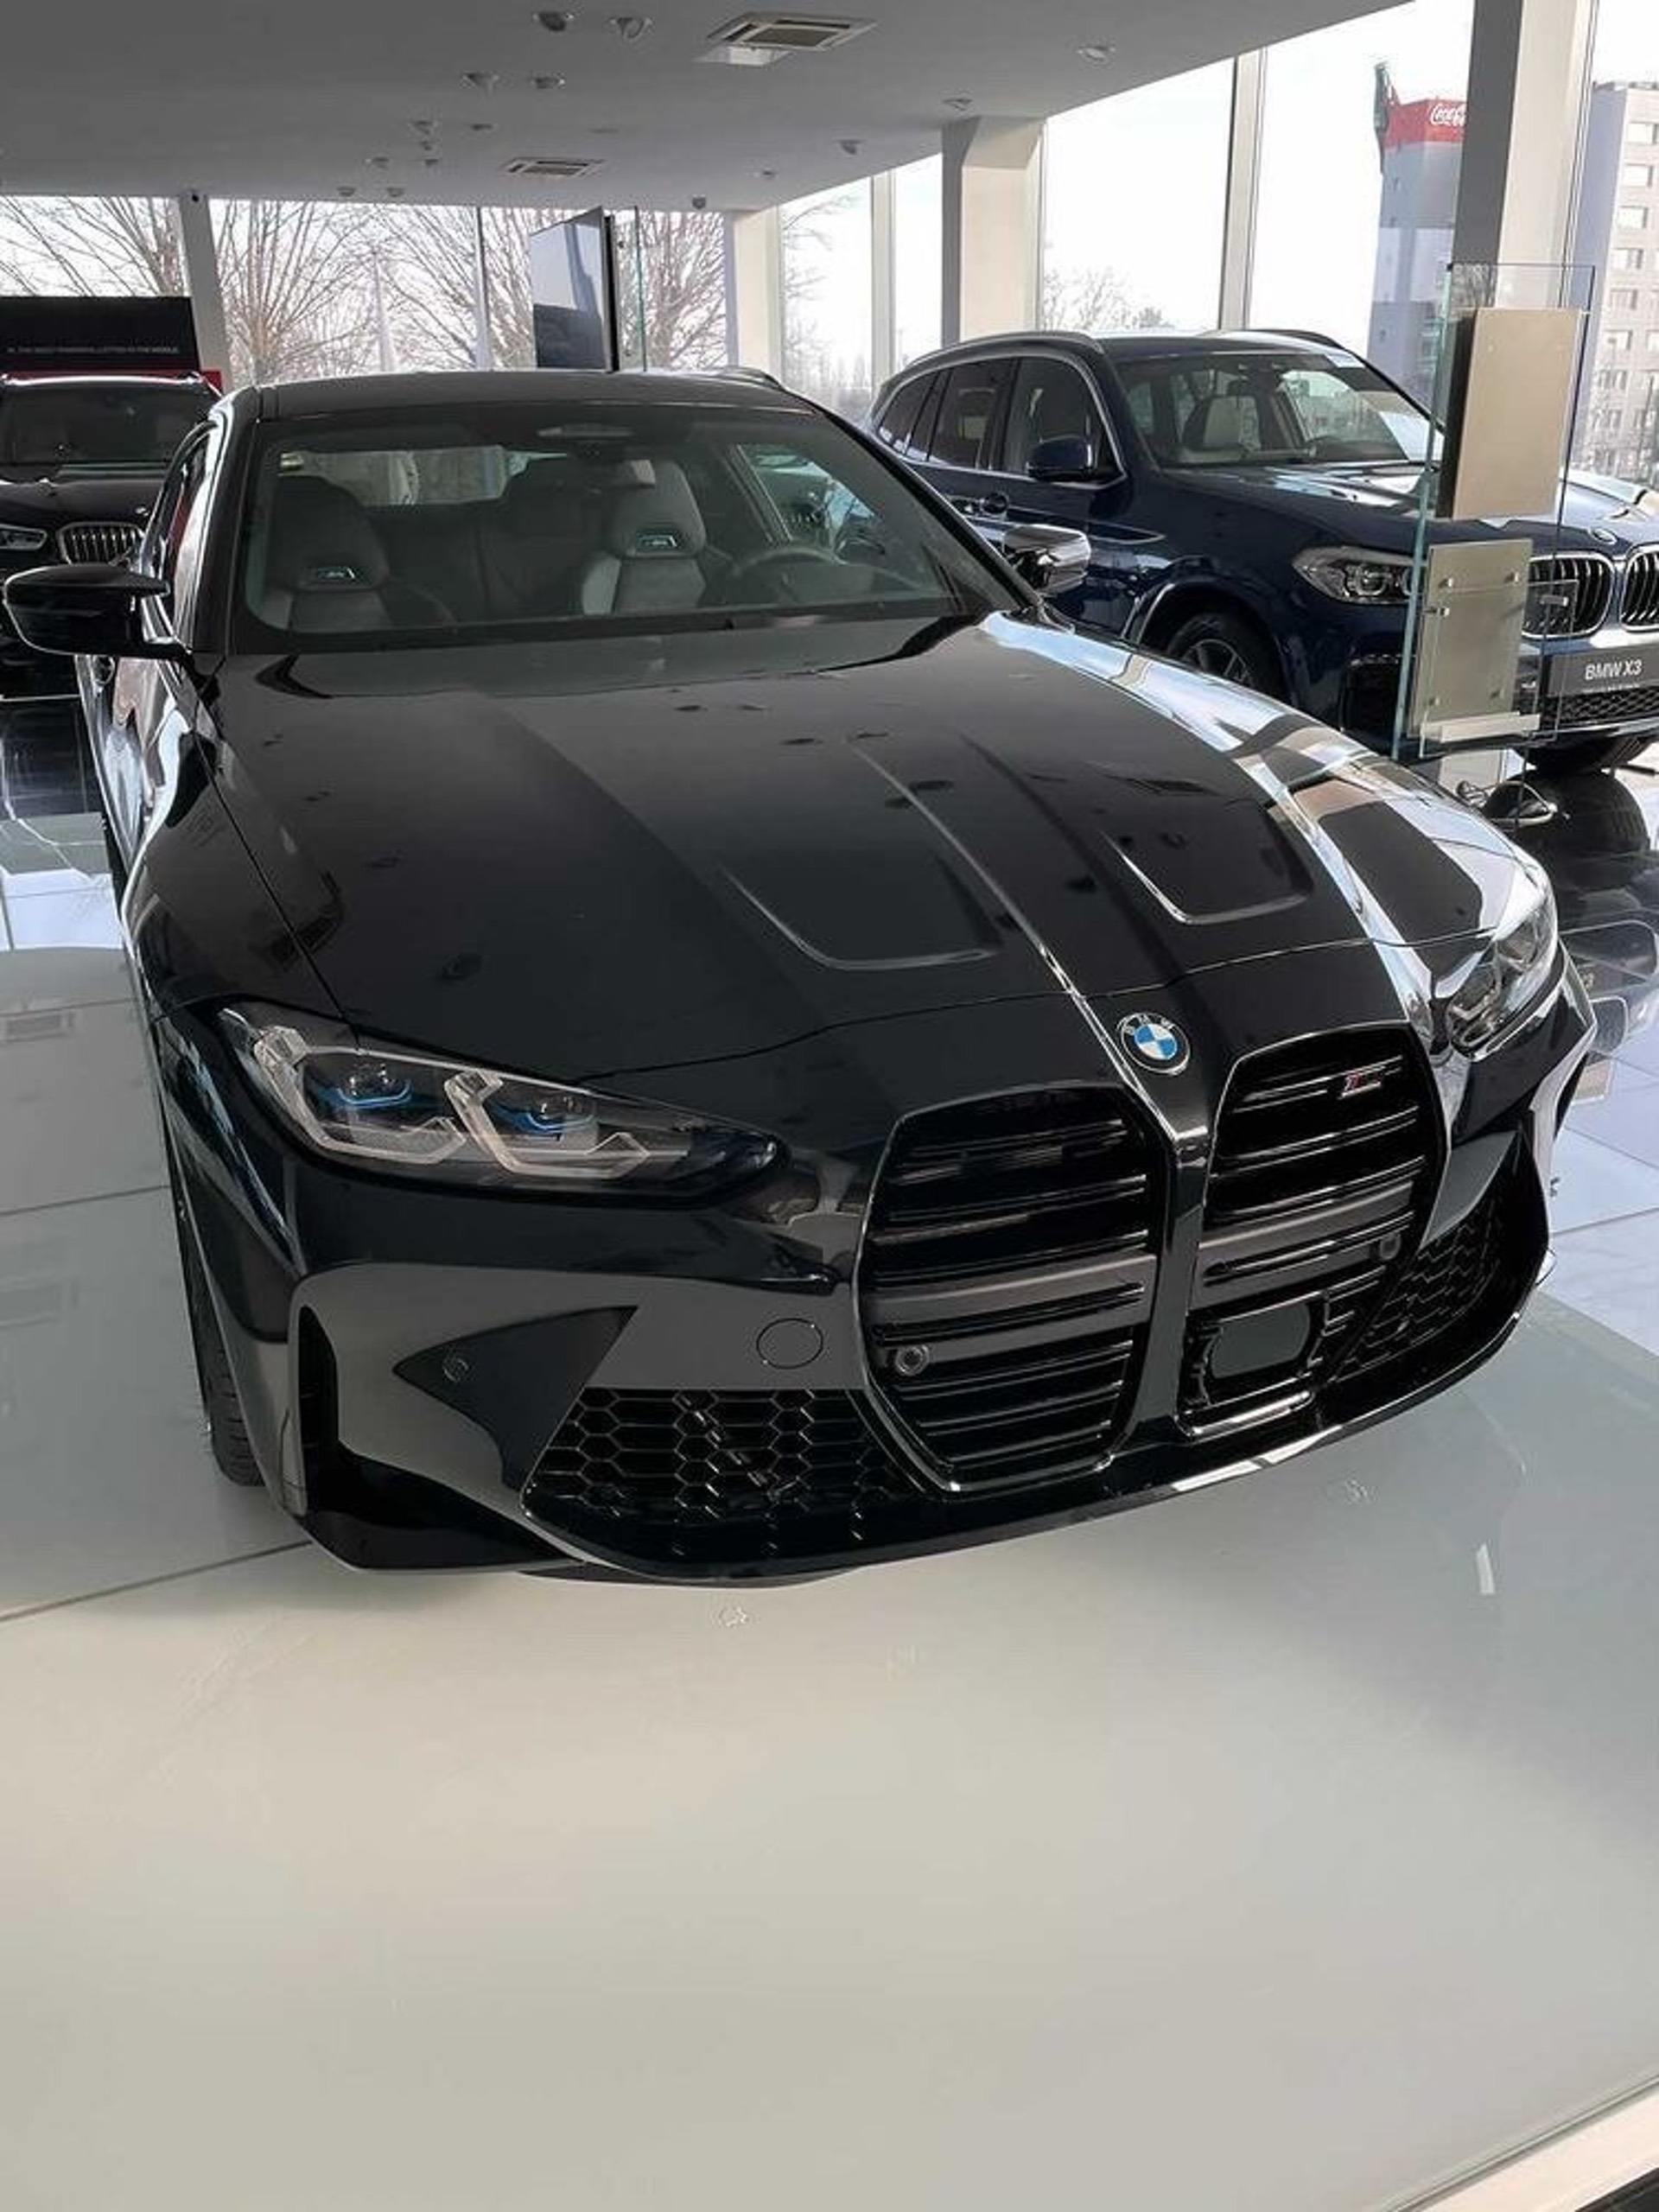 New photos of the 2021 BMW M4 in Sapphire Black Metallic